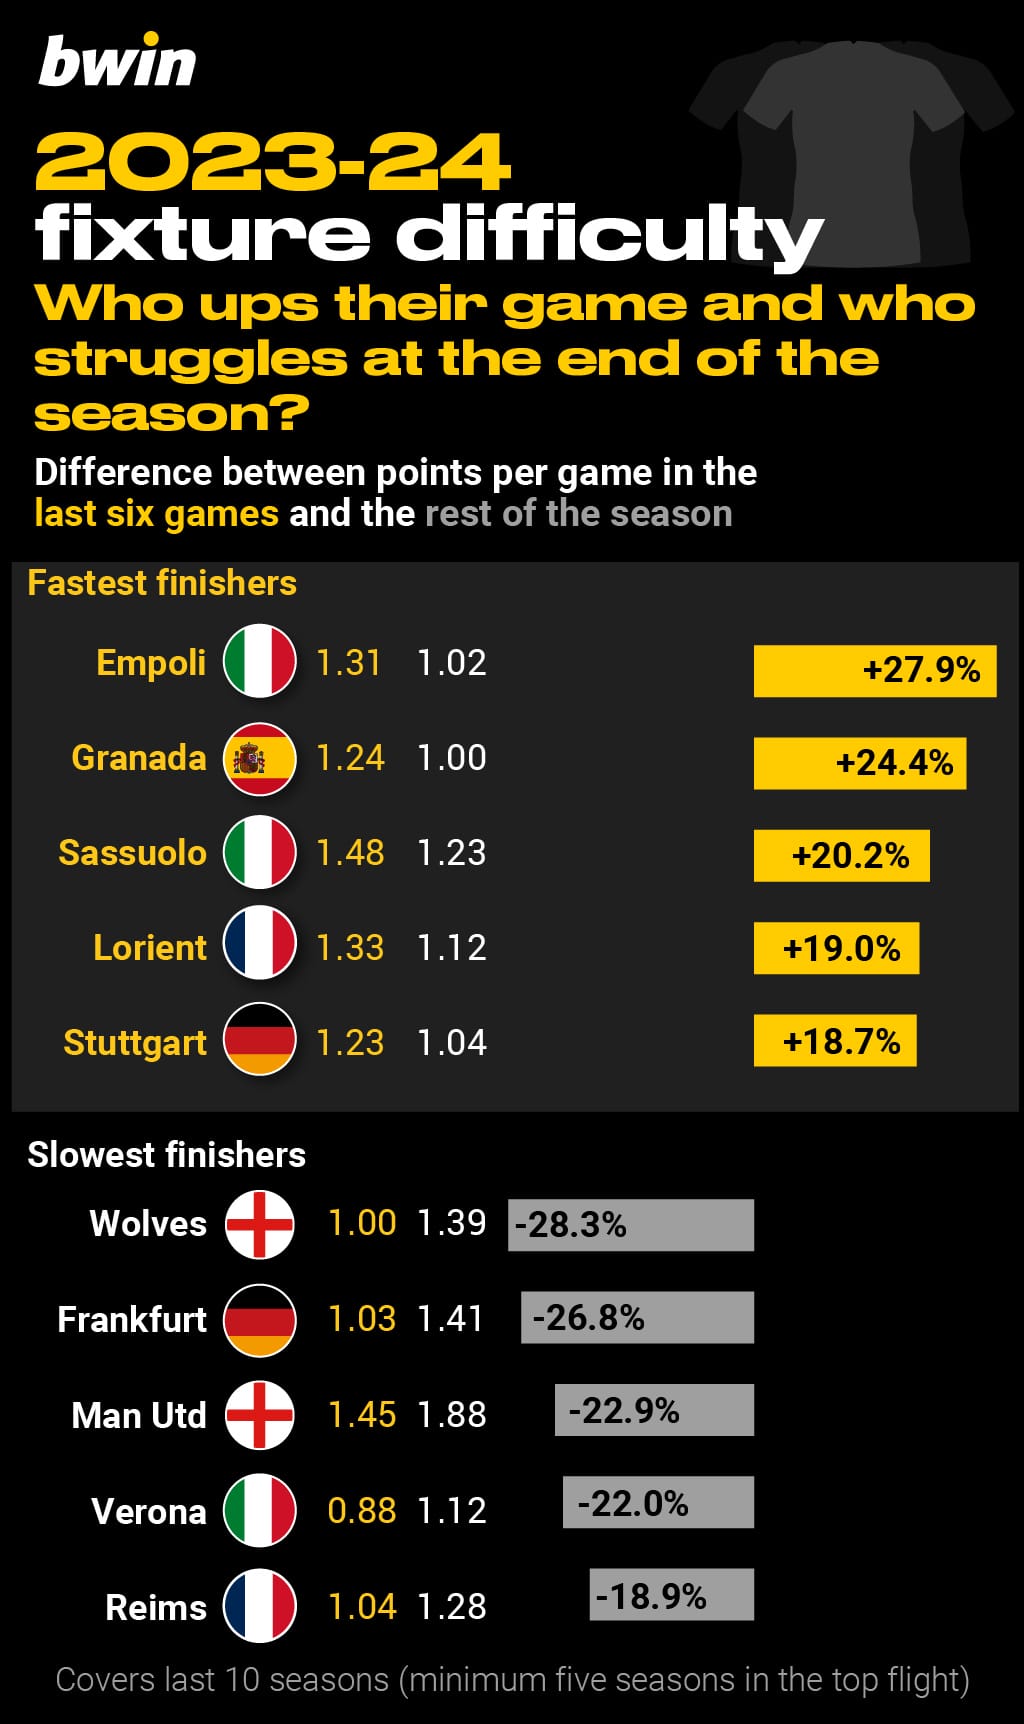 Whu ups their game and who struggles at the end of teh season from Europe's top leagues?